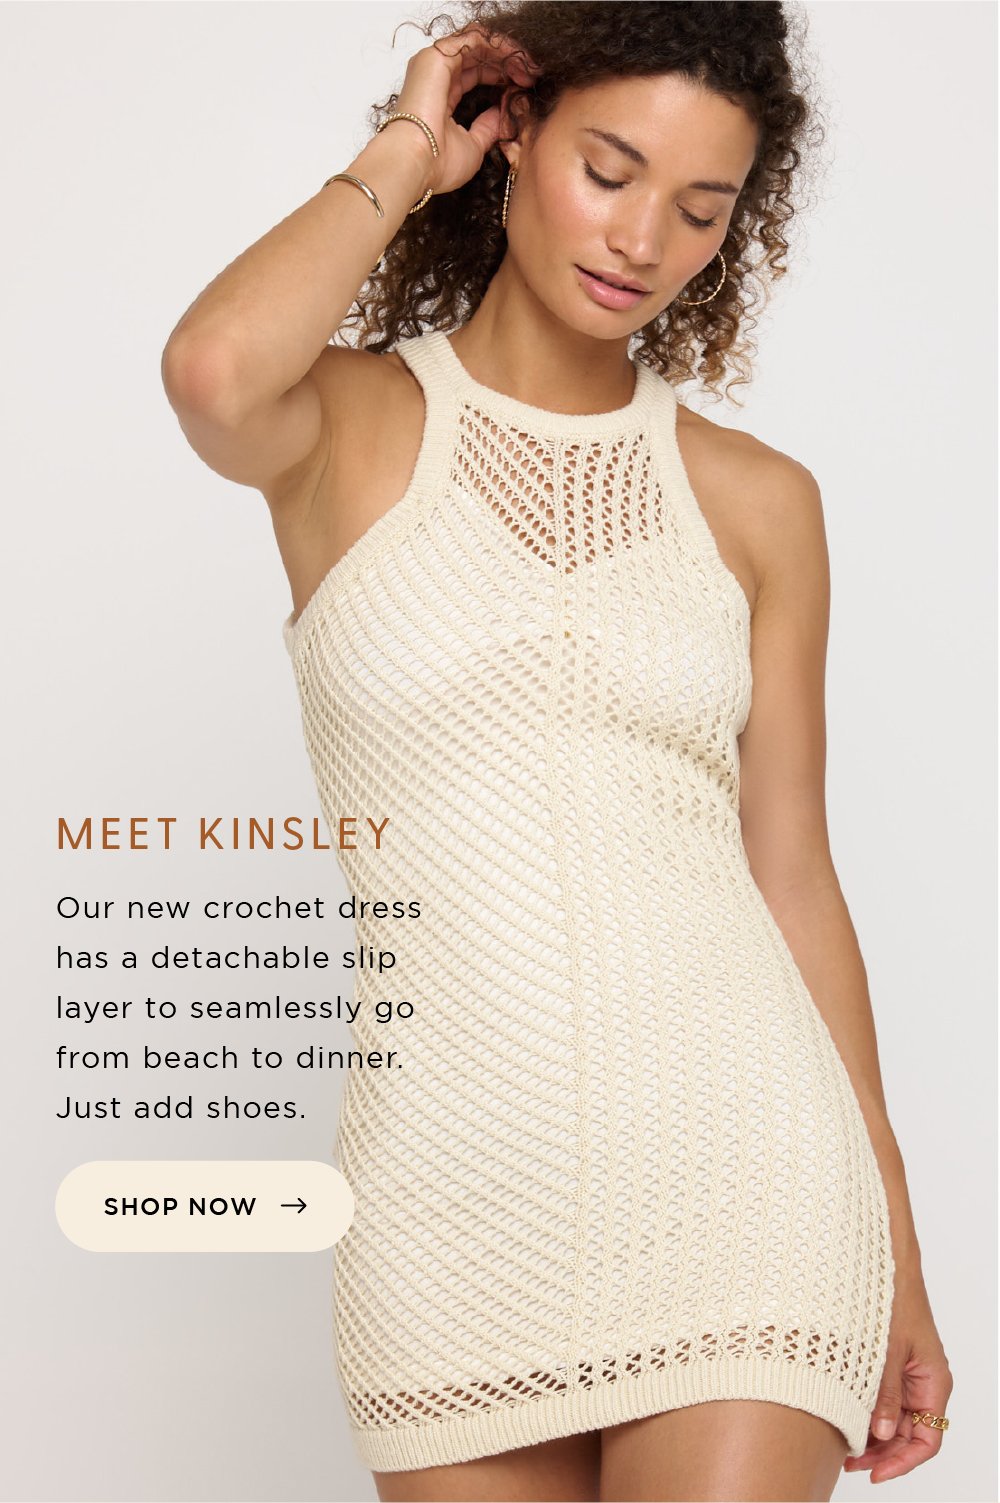 SHOP NOW - MET KINSLEY | Our new crochet dress has detachable slip layer to seamlessly go from beach to dinner